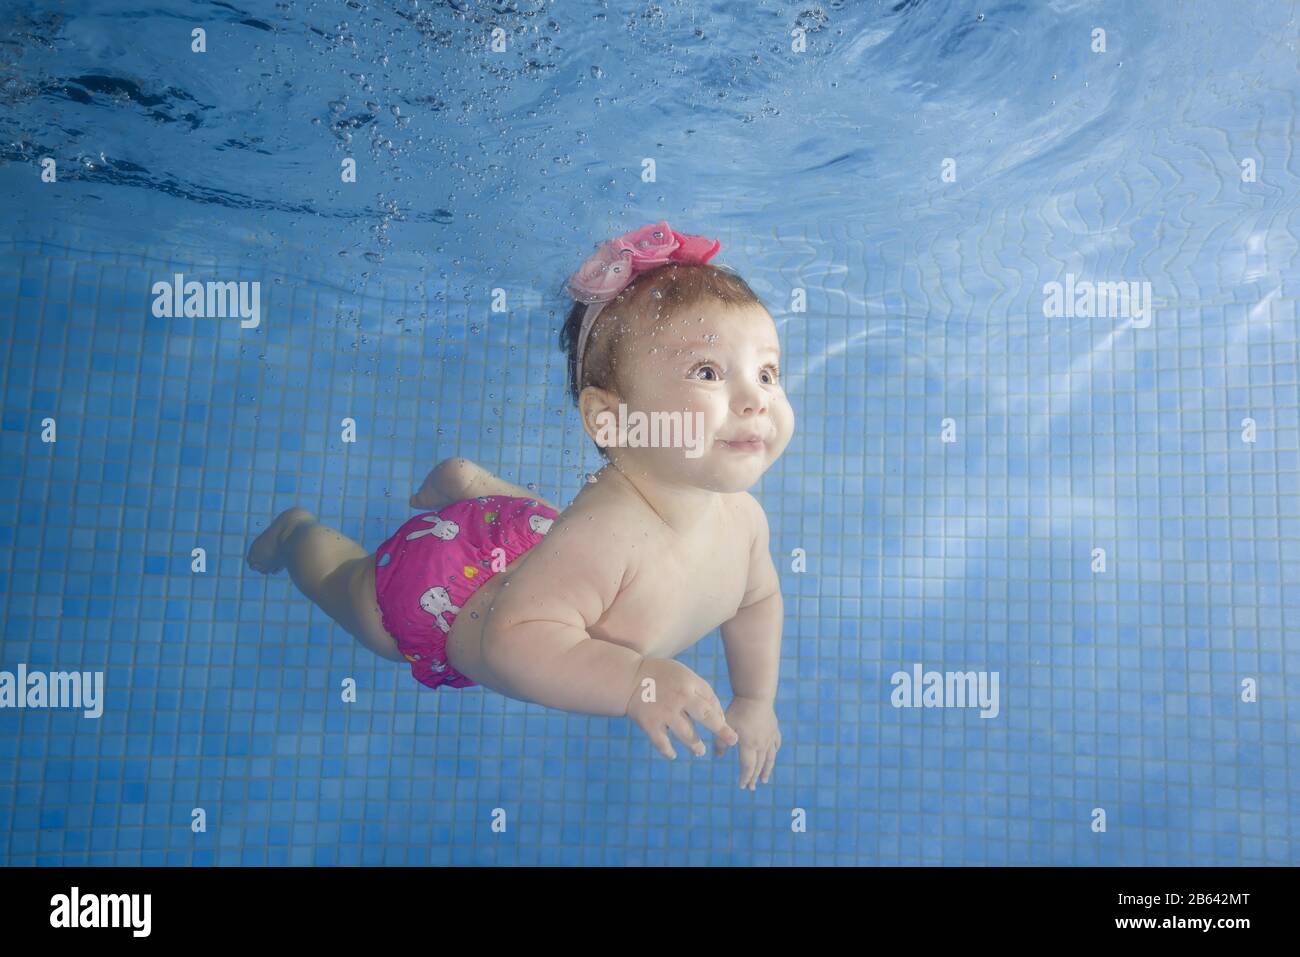 Little baby learning to swim underwater in a swimming pool, Ukraine Stock Photo